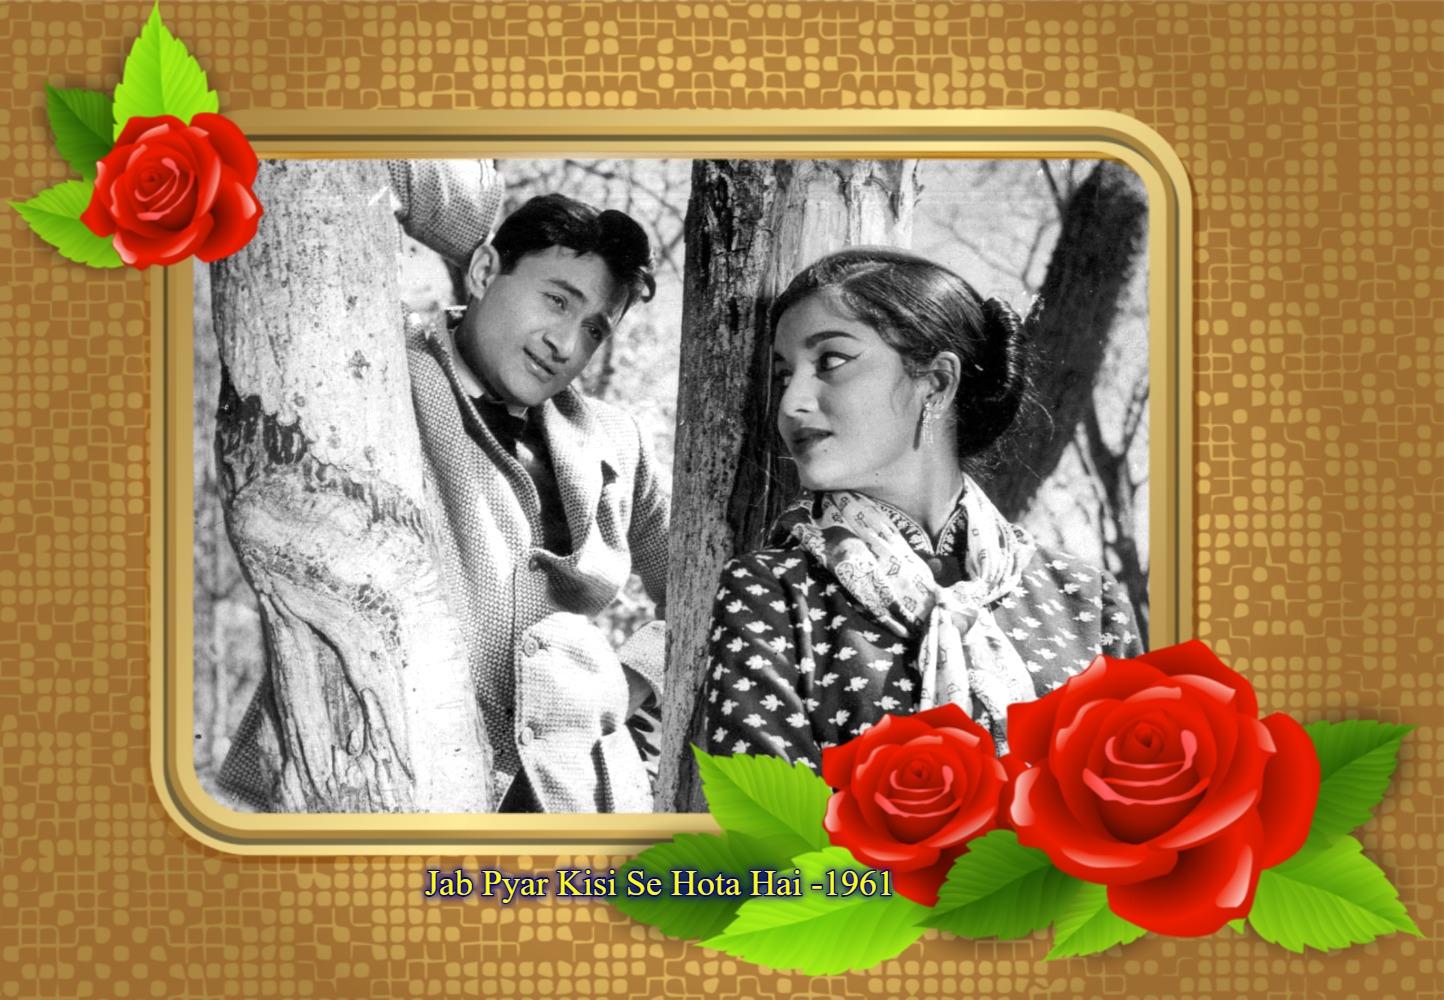 You are currently viewing “The Evergreen & Dashing Matinee Idol Dev Anand”